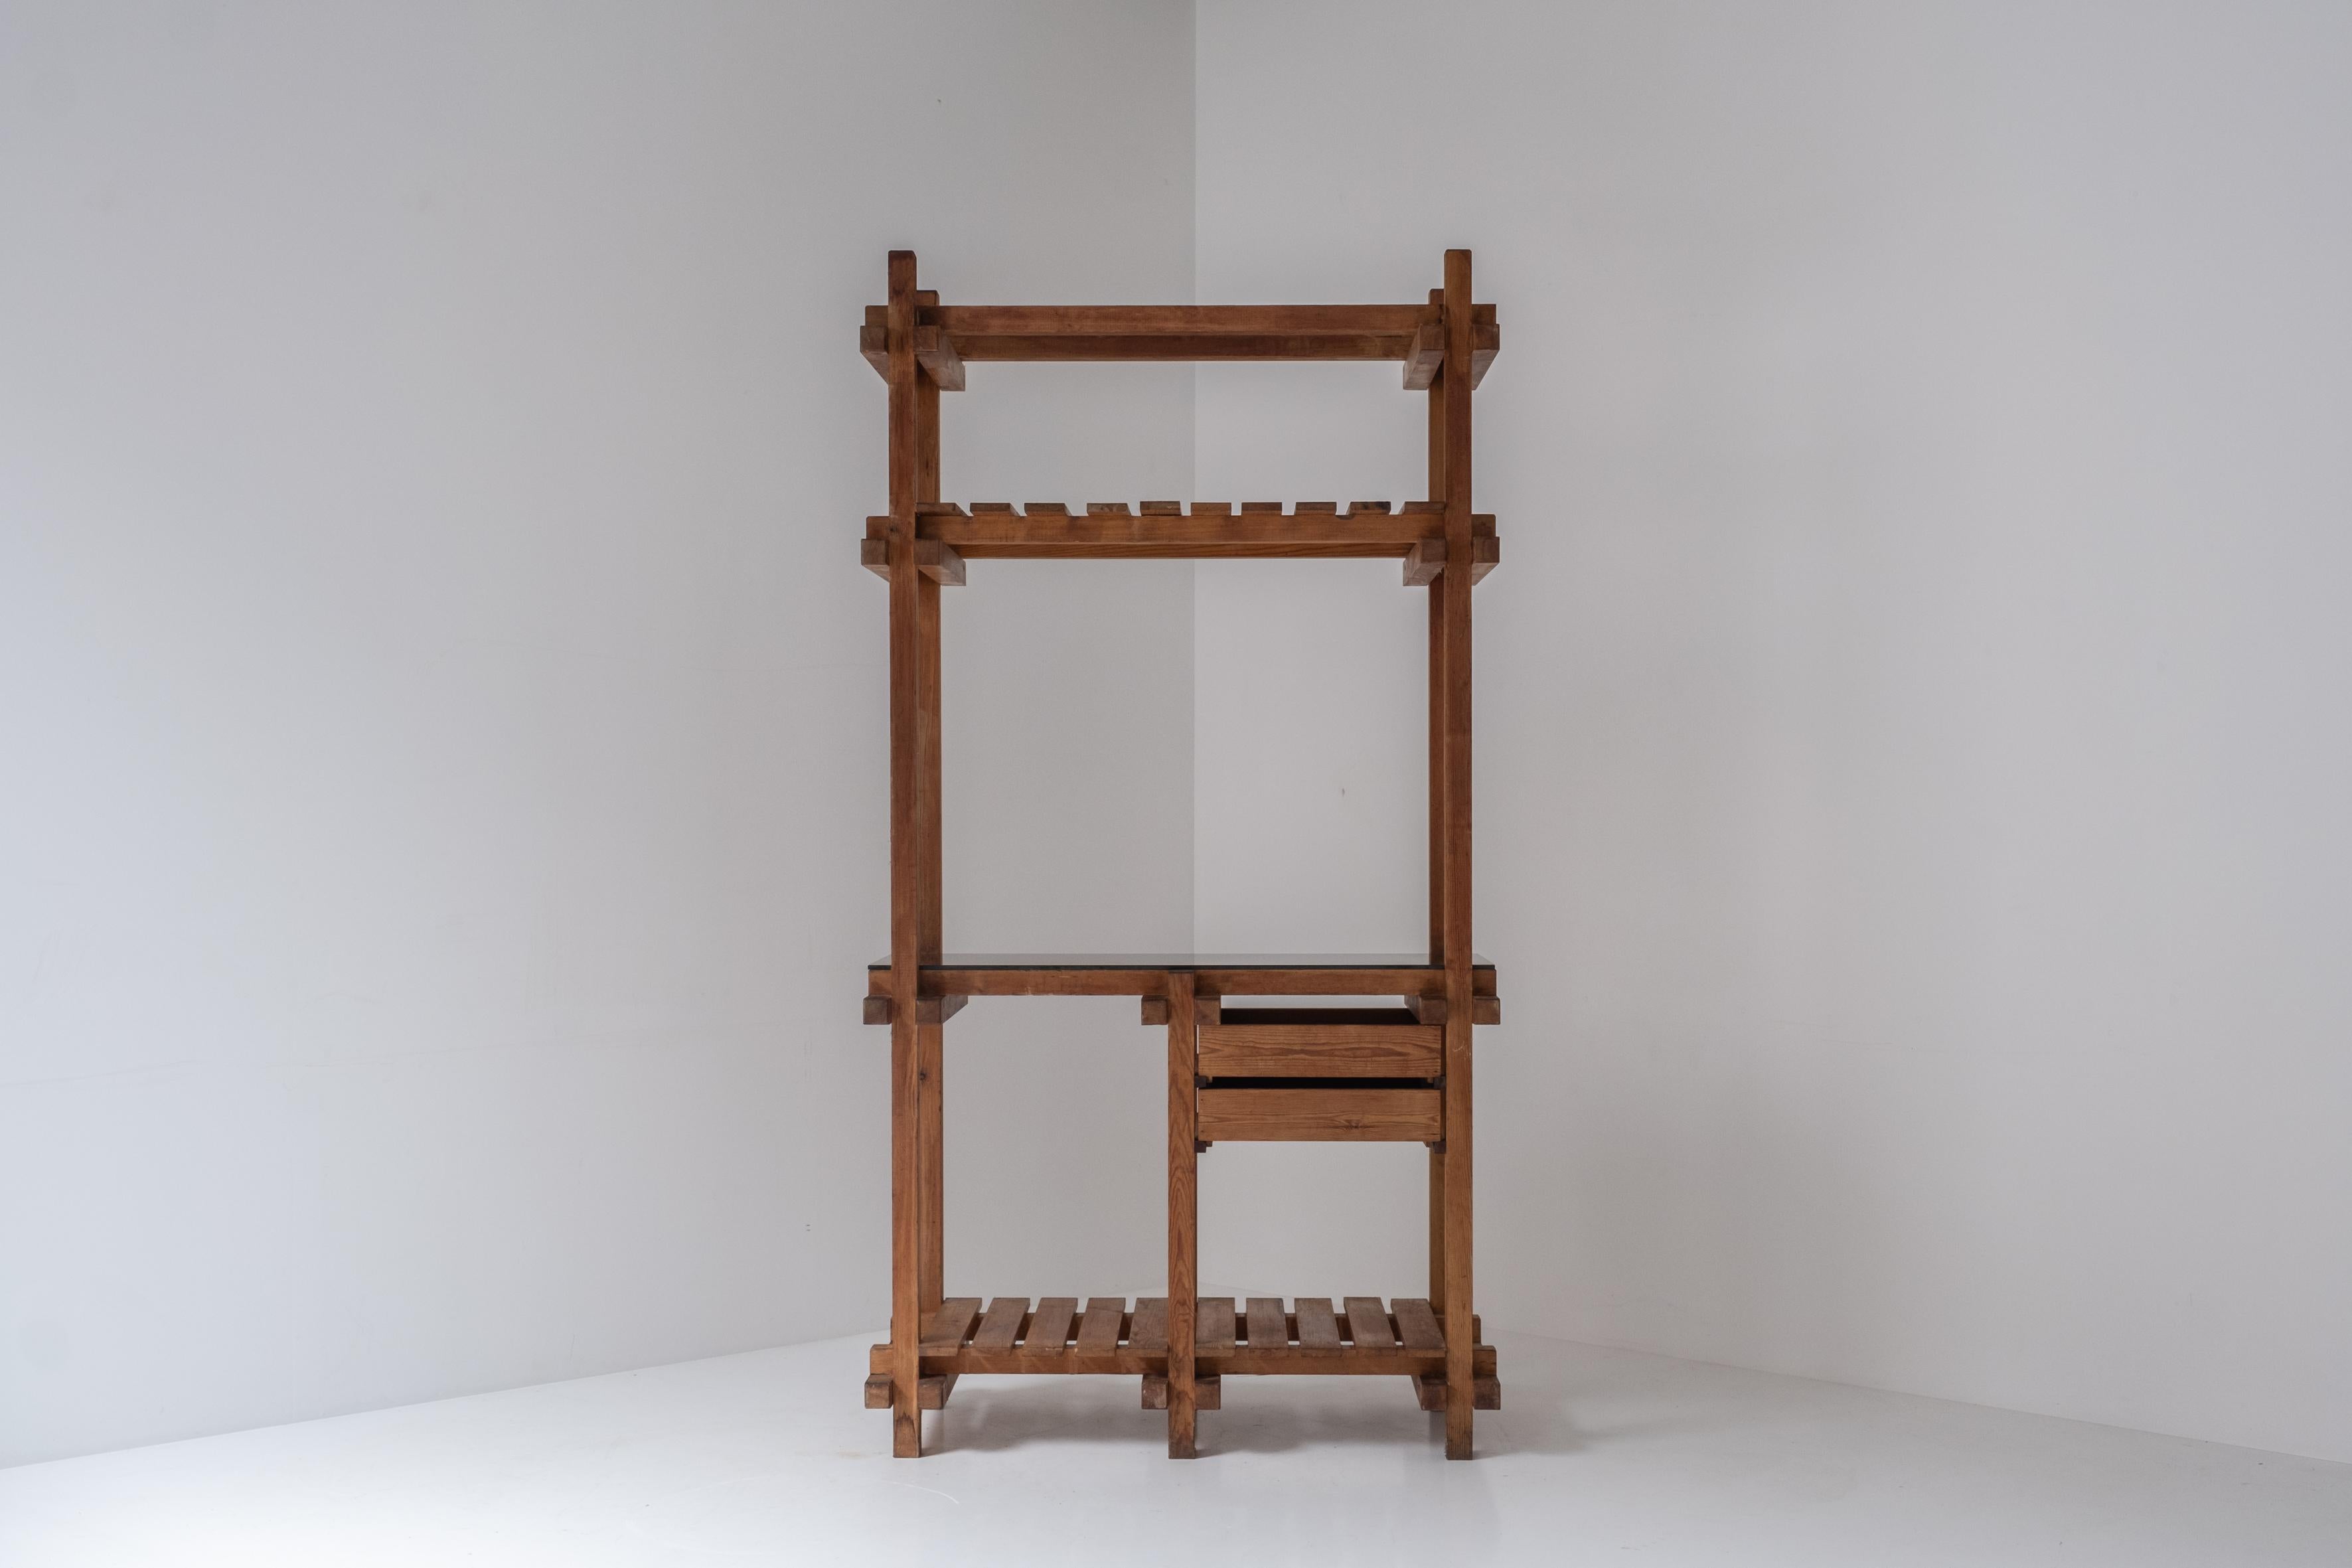 Open storage unit designed and manufactured in the 1970s. This prototype was made by a Belgian architect who was clearly influenced by the works by Pierre Chapo and even Gerrit Rietveld. The unit features a frame made out of pine. Visible signs from